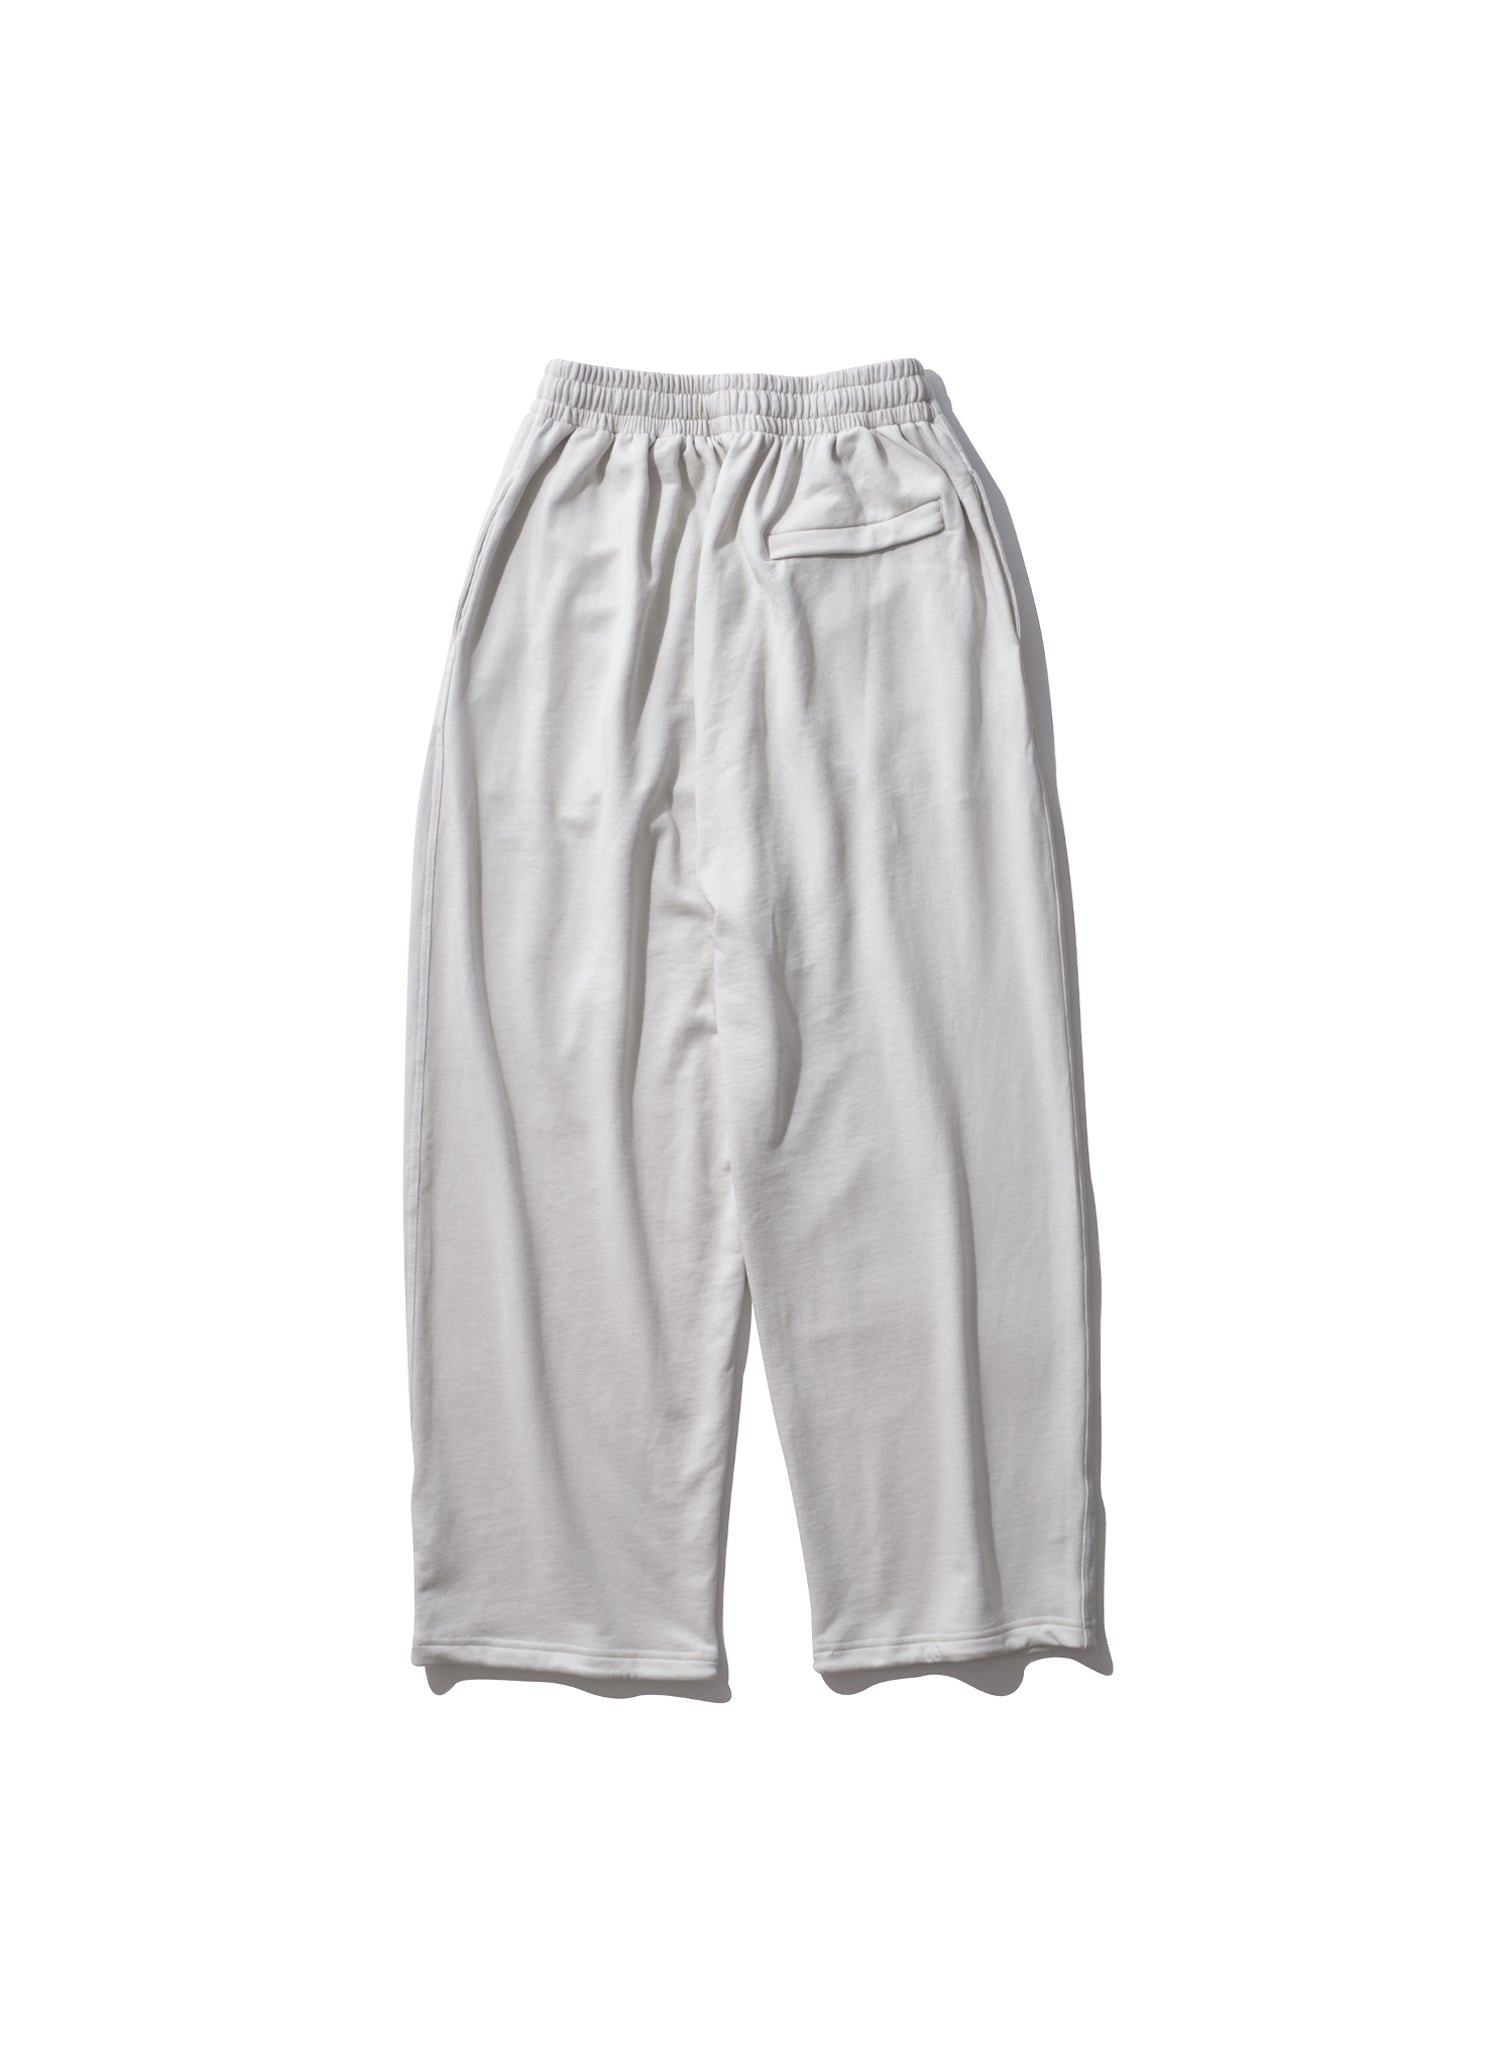 WILLY CHAVARRIA / NORTHSIDER JOGGER PANTS VAPOROUS GRAY